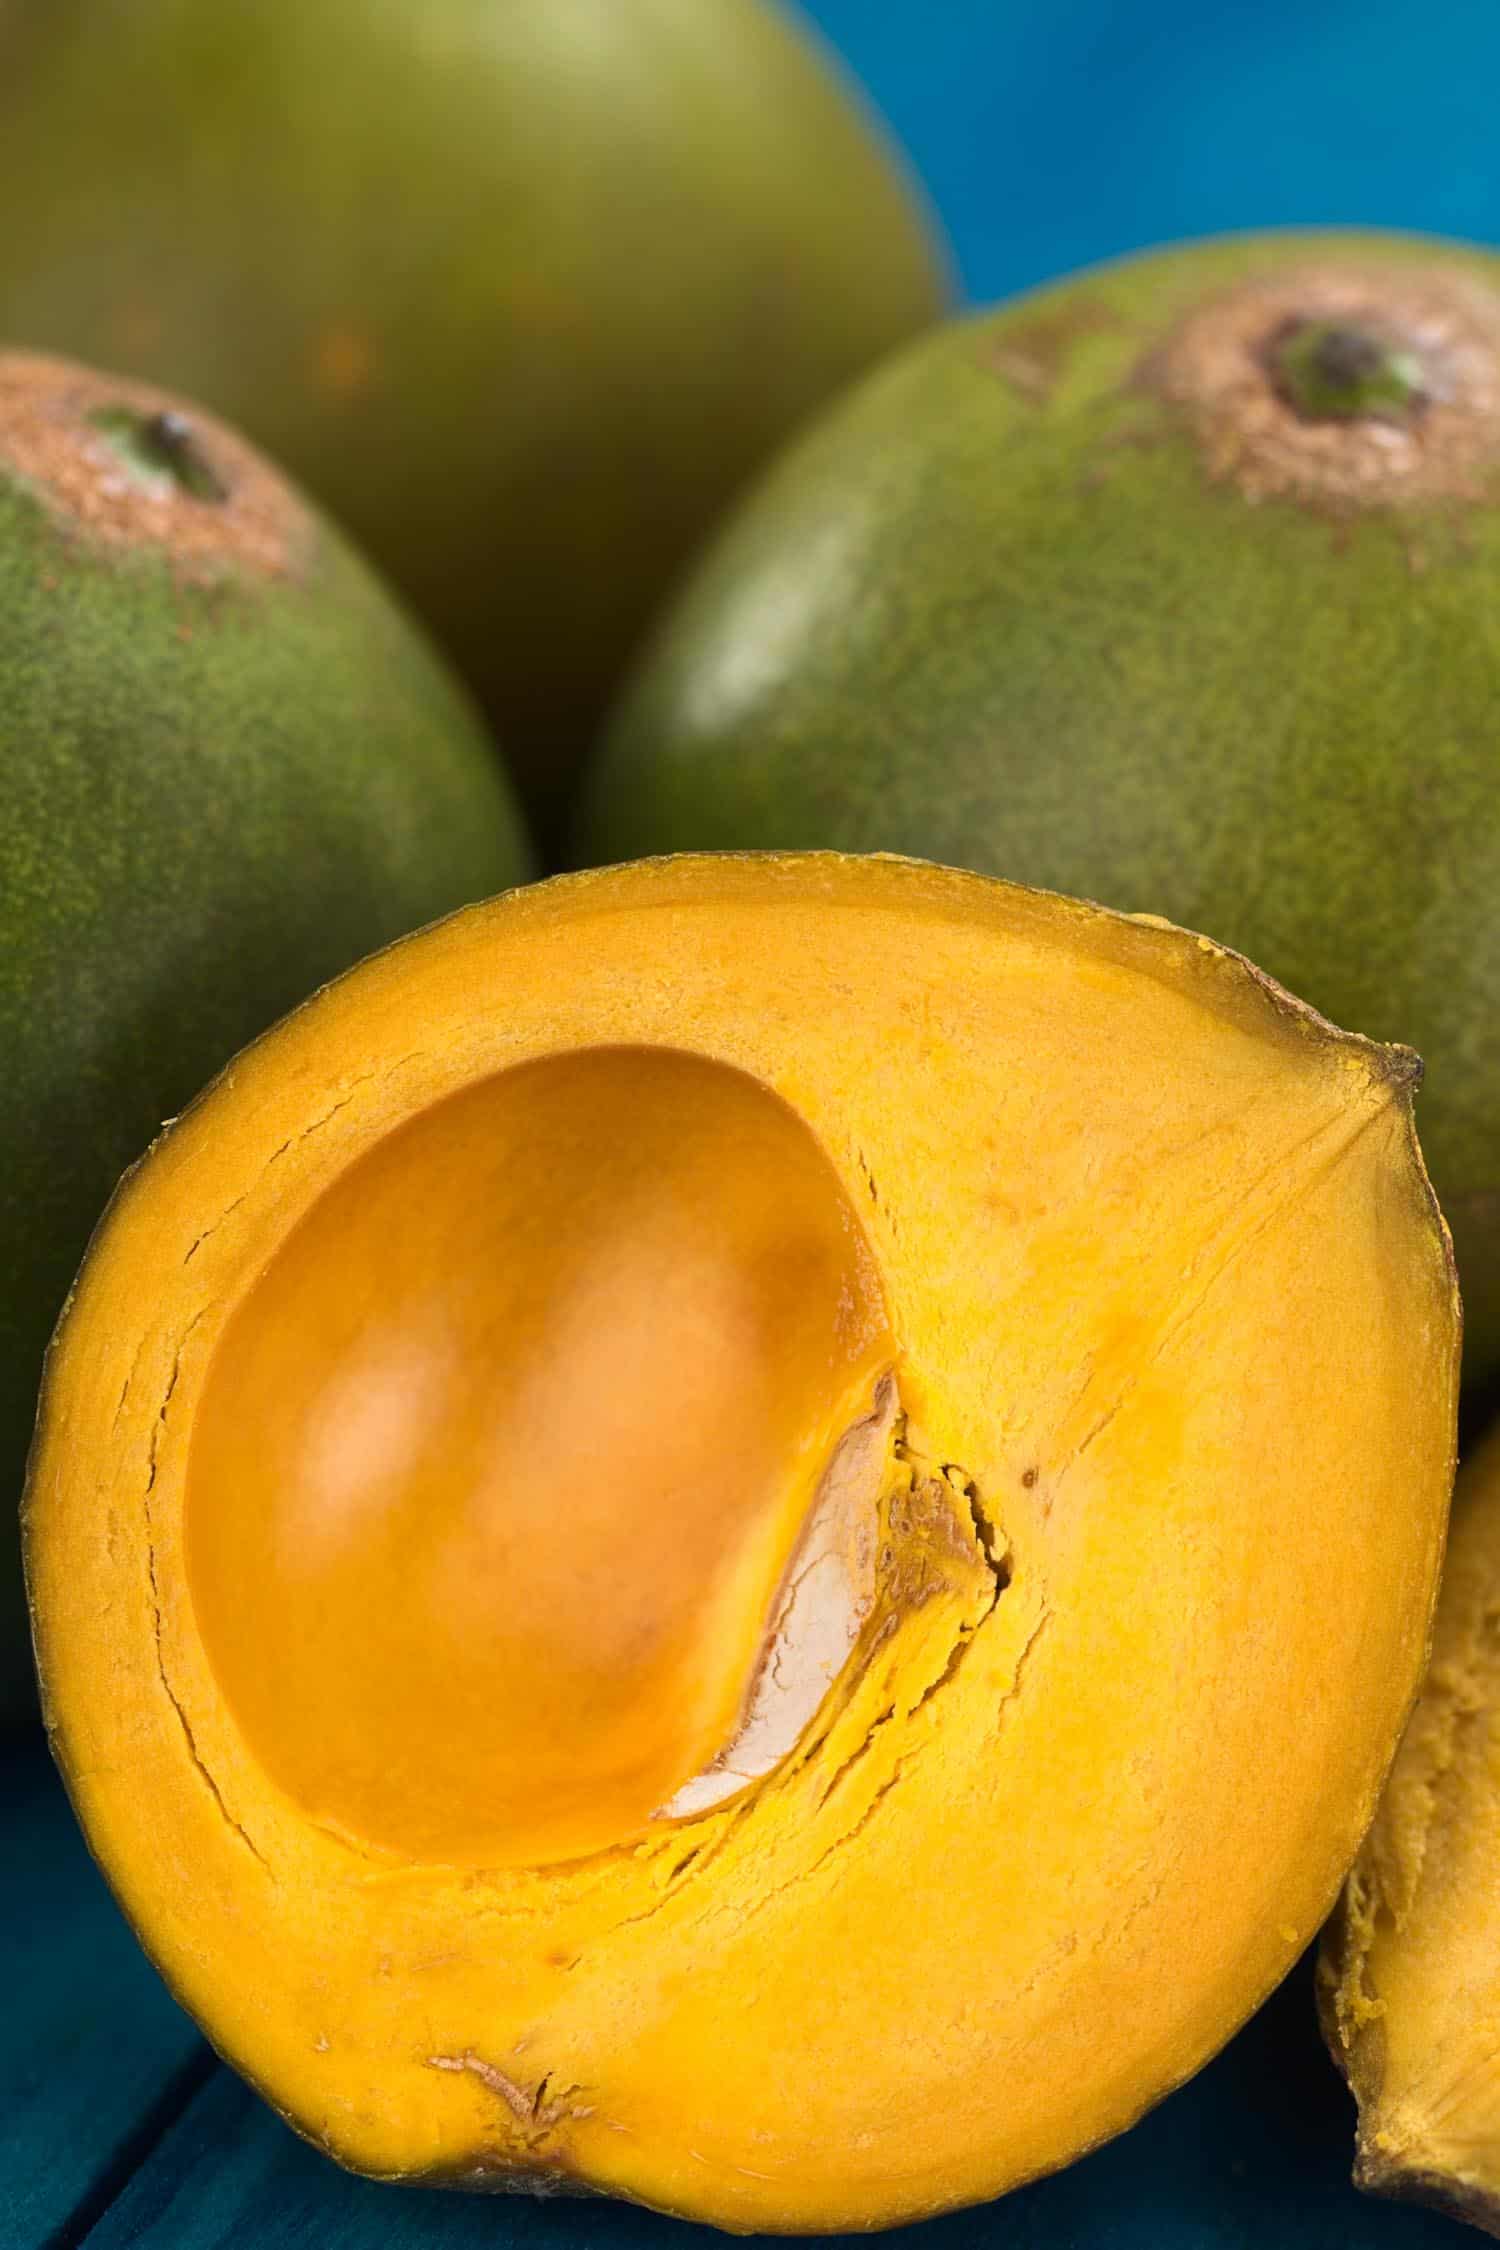 Hawaiian fruit called eggfruit, also known in Peru as lucuma (lat. Pouteria lucuma) which has a dry sweet flesh and is mostly used to prepare juices milkshakes yogurts ice cream and other desserts (Selective Focus Focus on the front of the standing lucuma half)